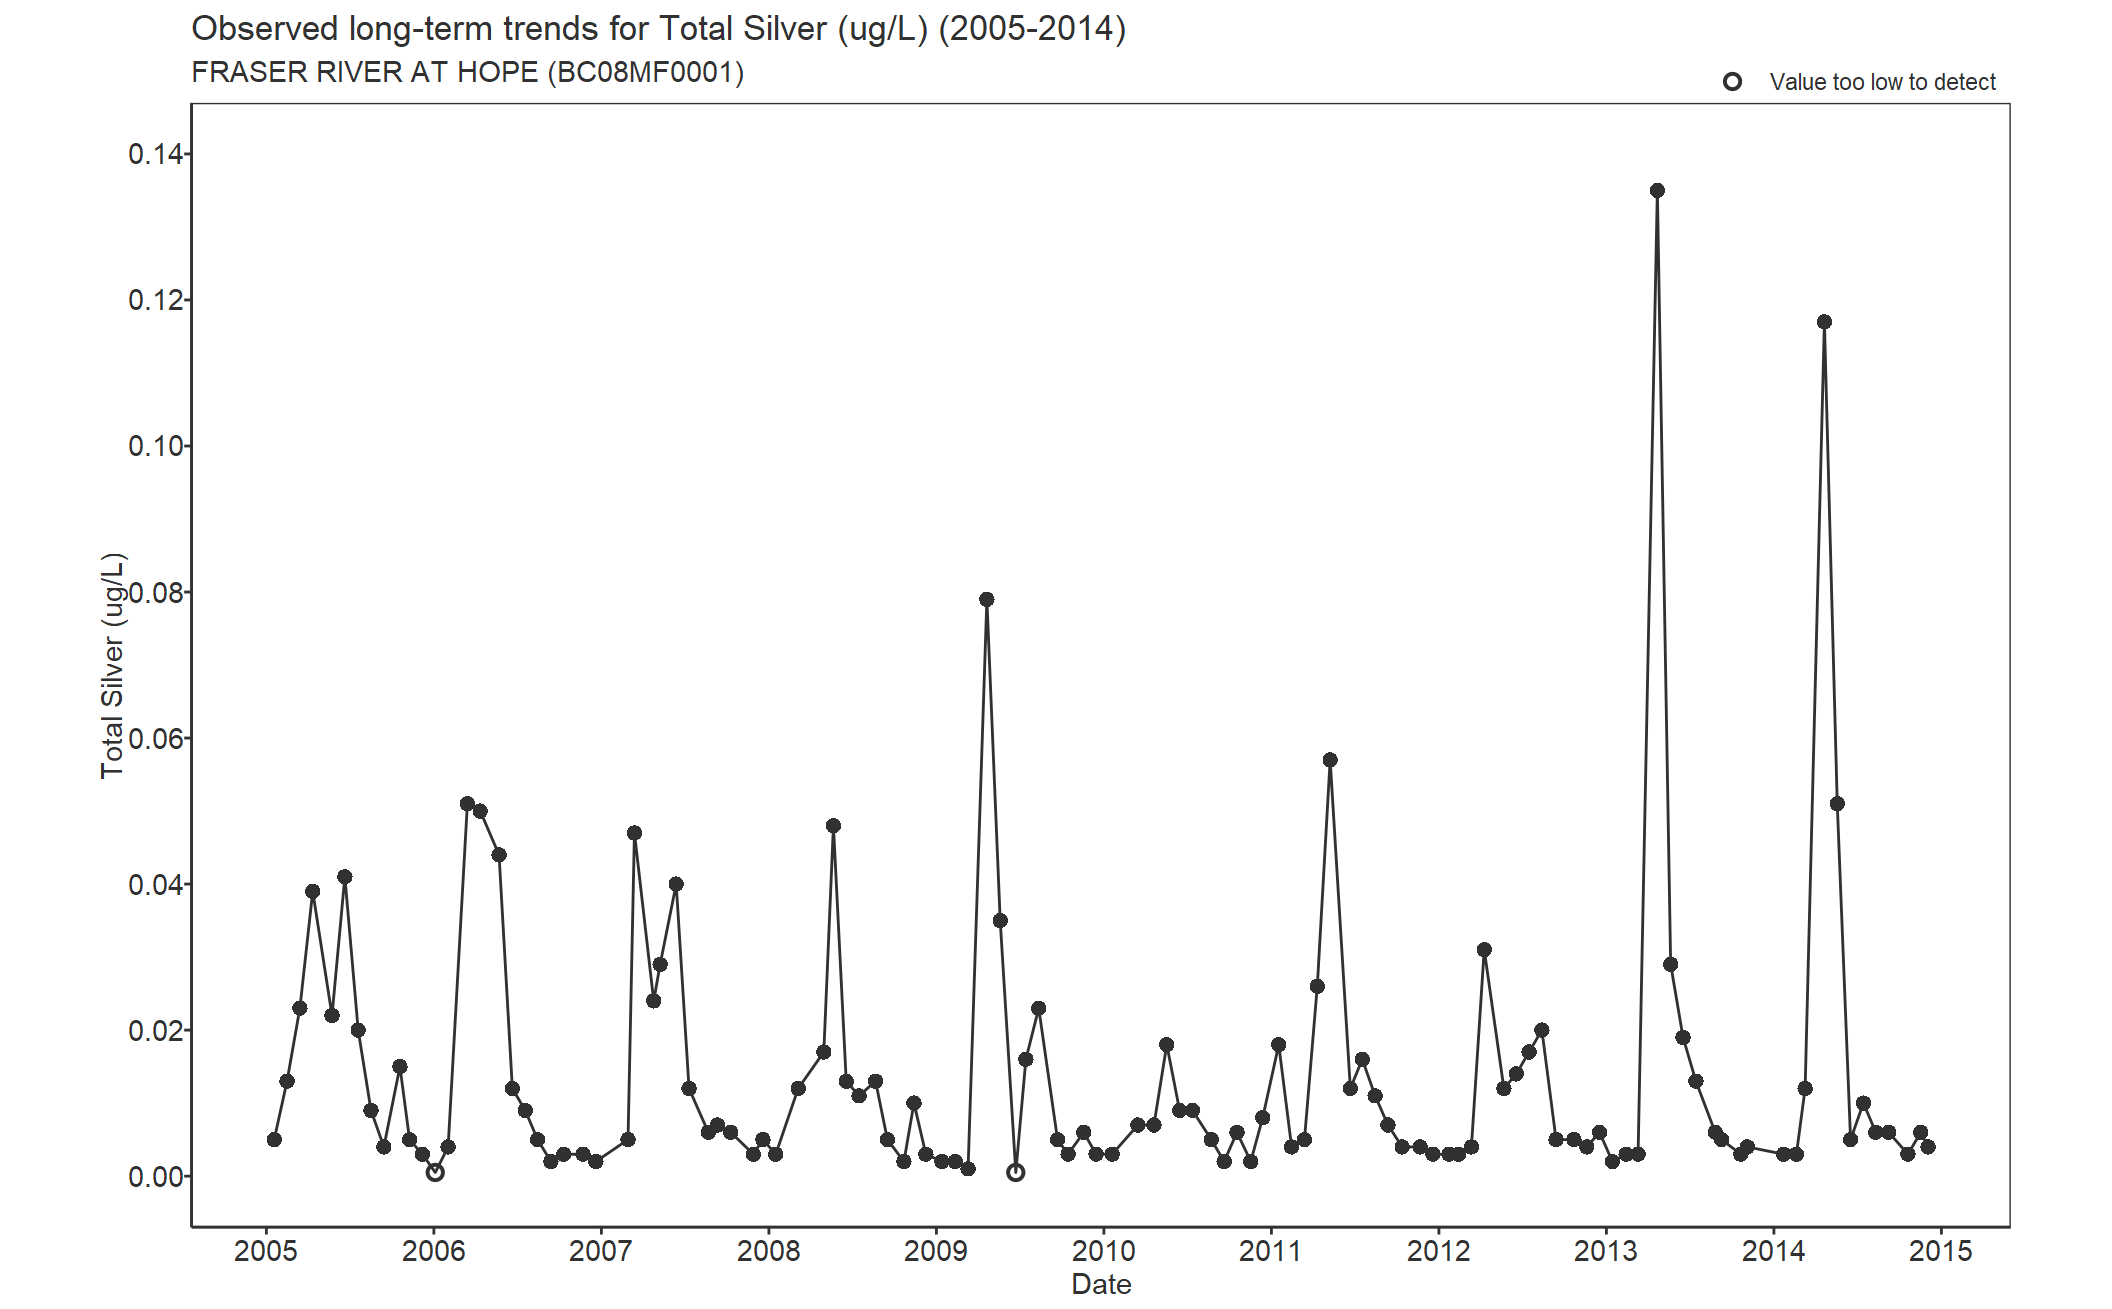 Observed long-term trends for Silver Total (2005-2014)